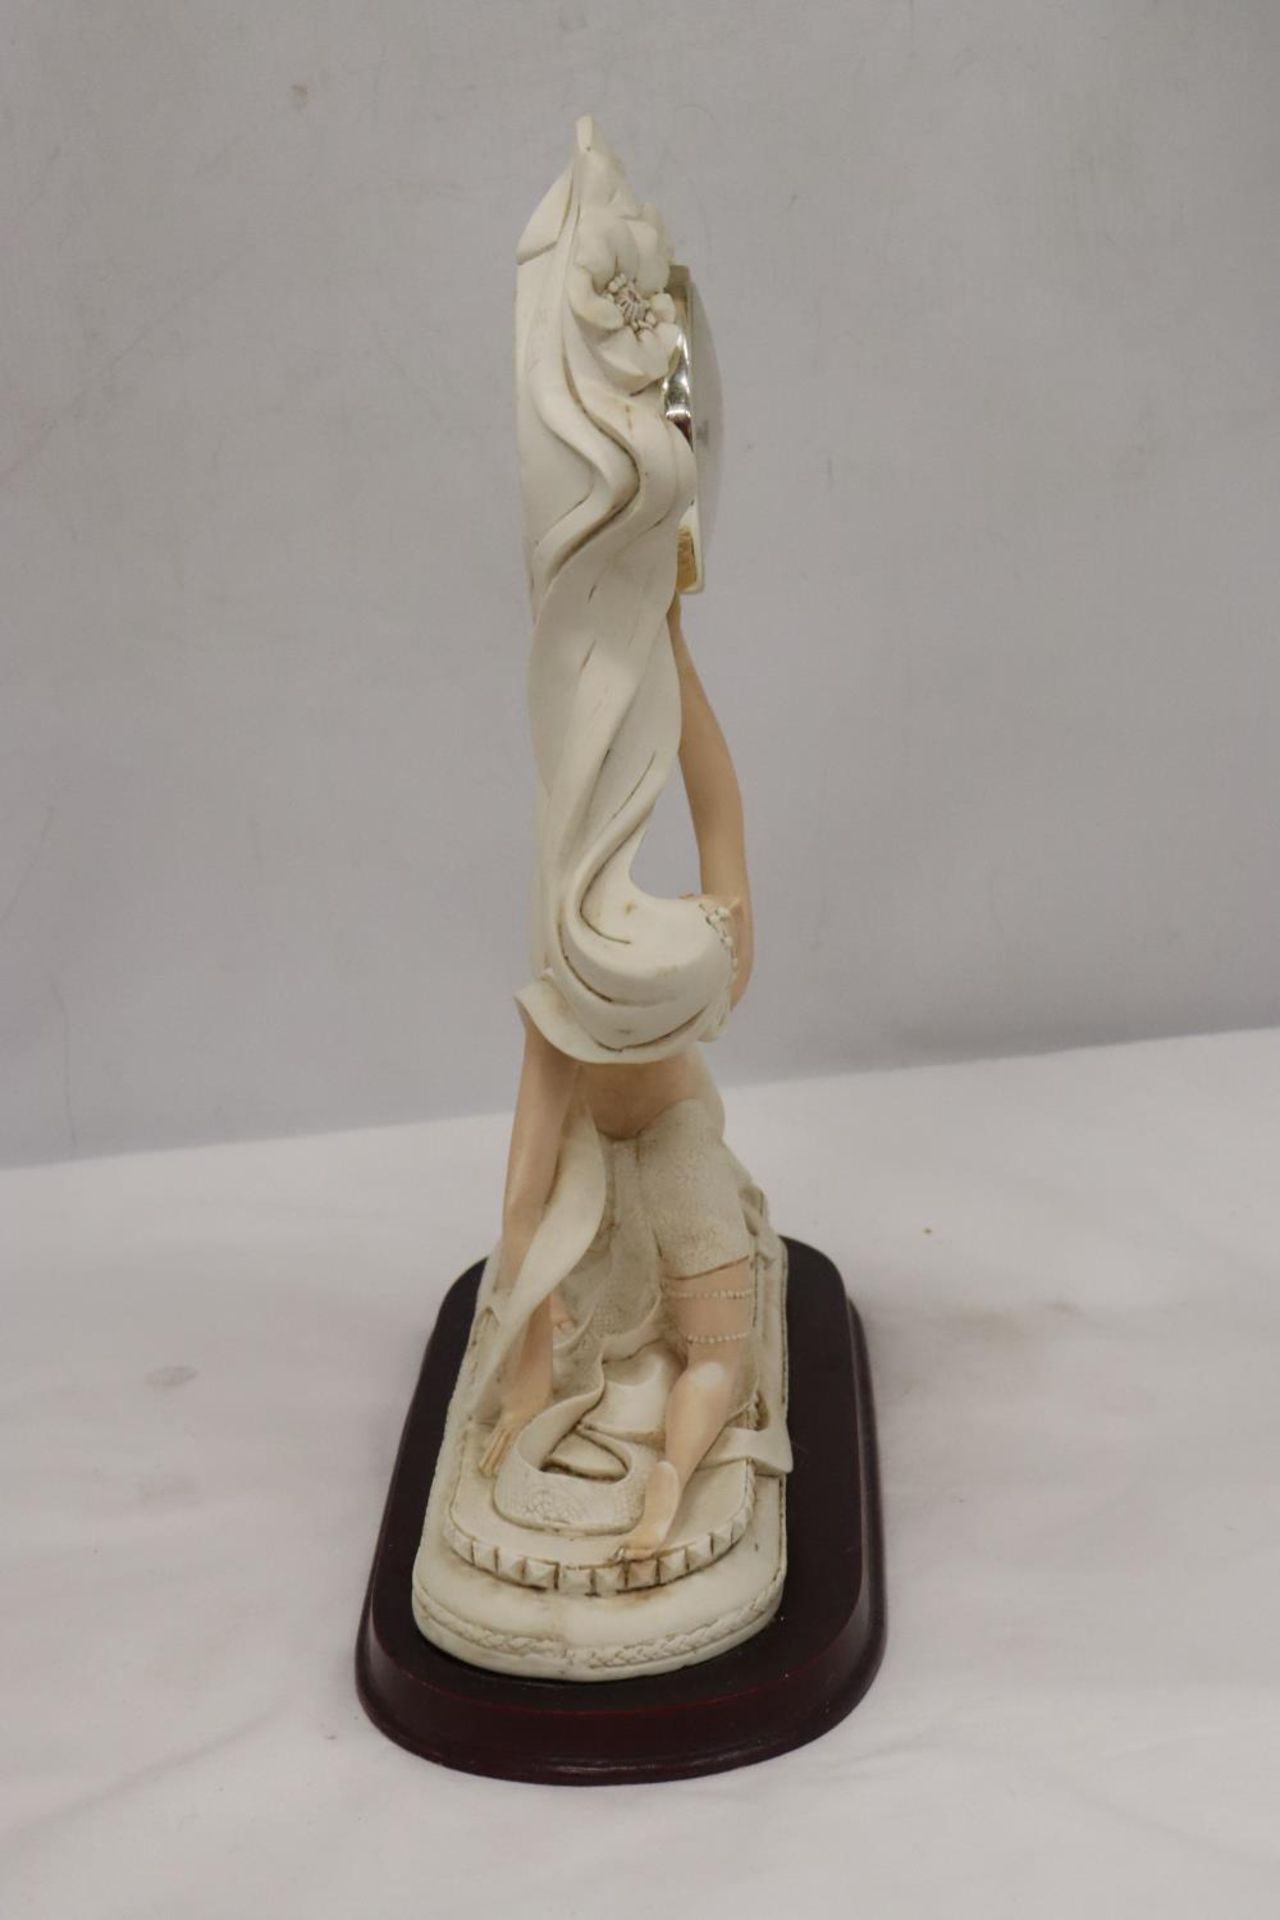 AN ART DECO STYLE MANTLE CLOCK WITH A LADY FIGURINE, HEIGHT 36CM - Image 5 of 7